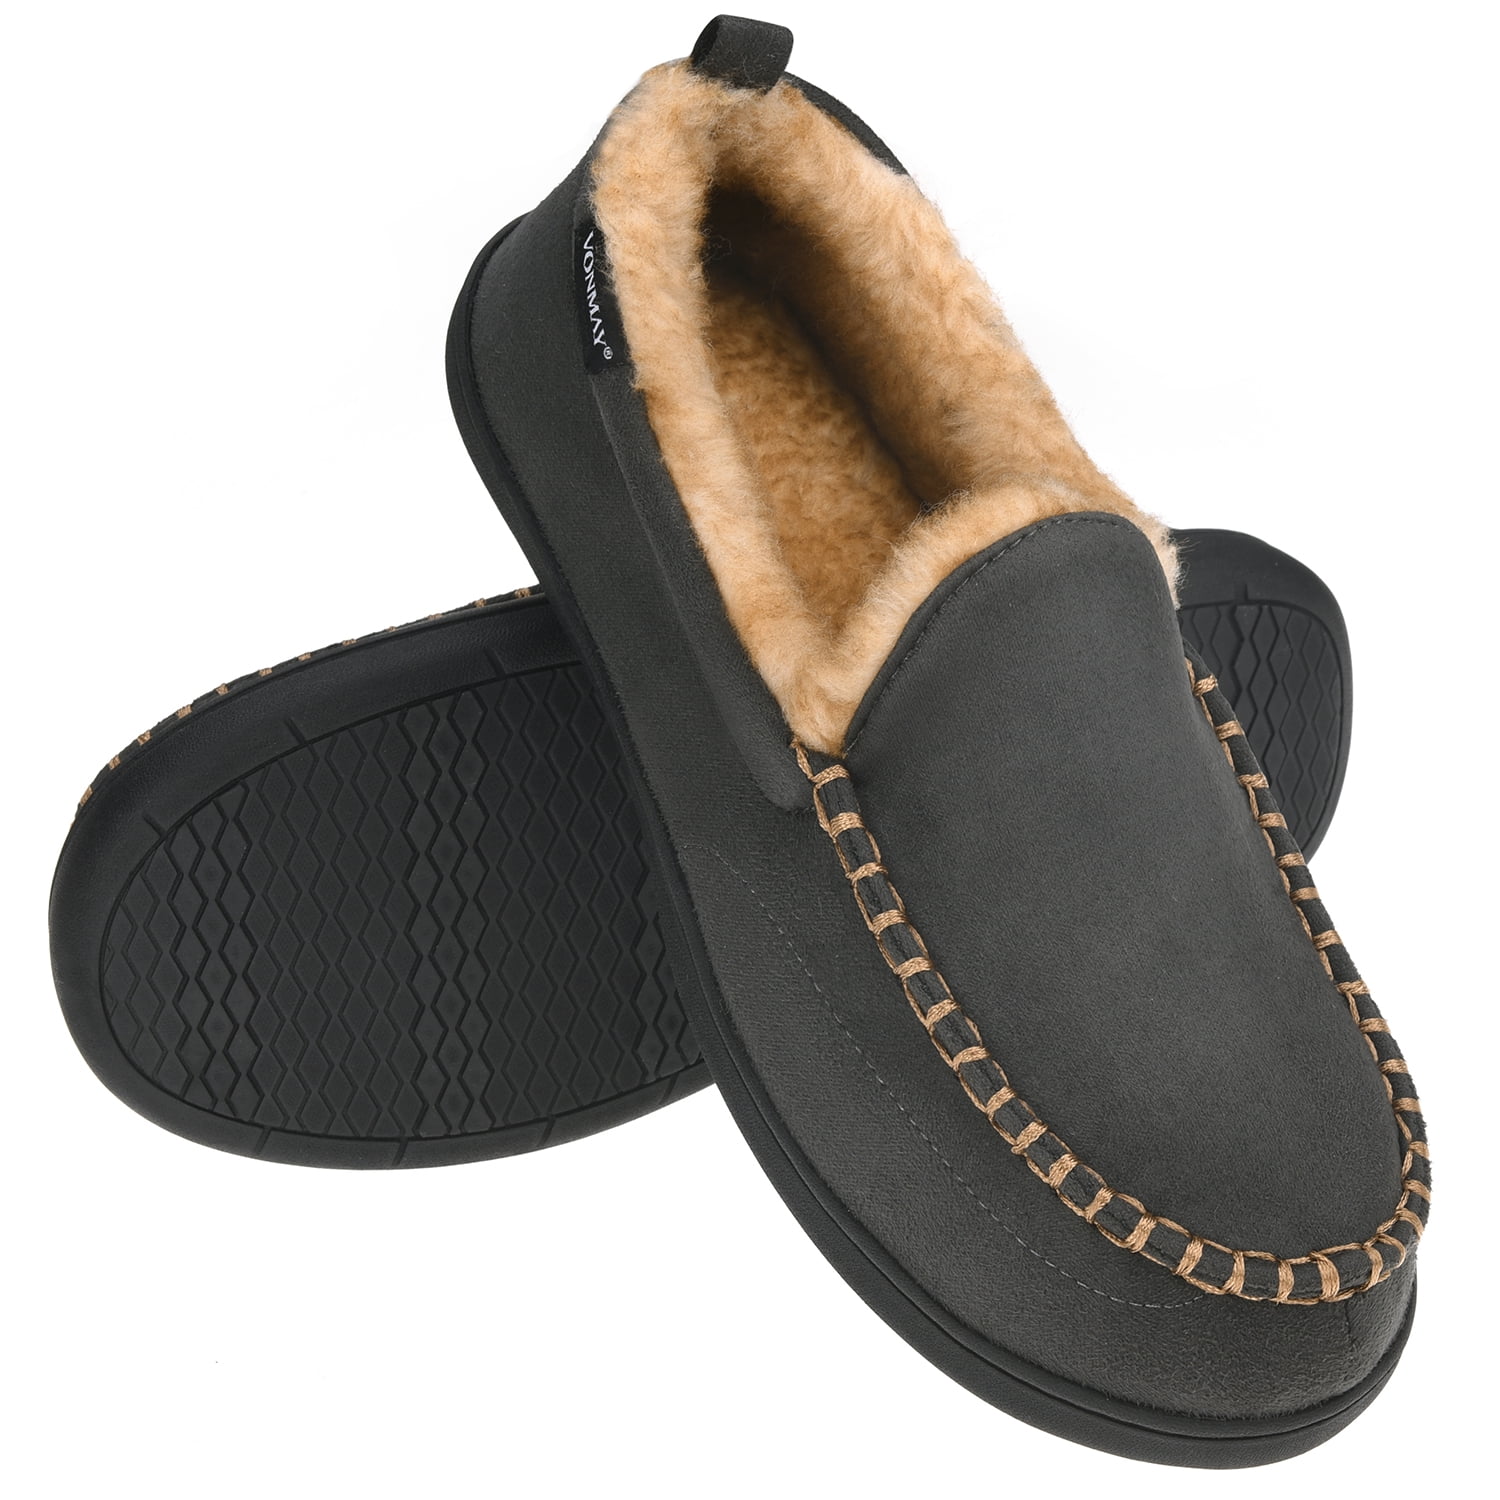 moccasin slipper shoes